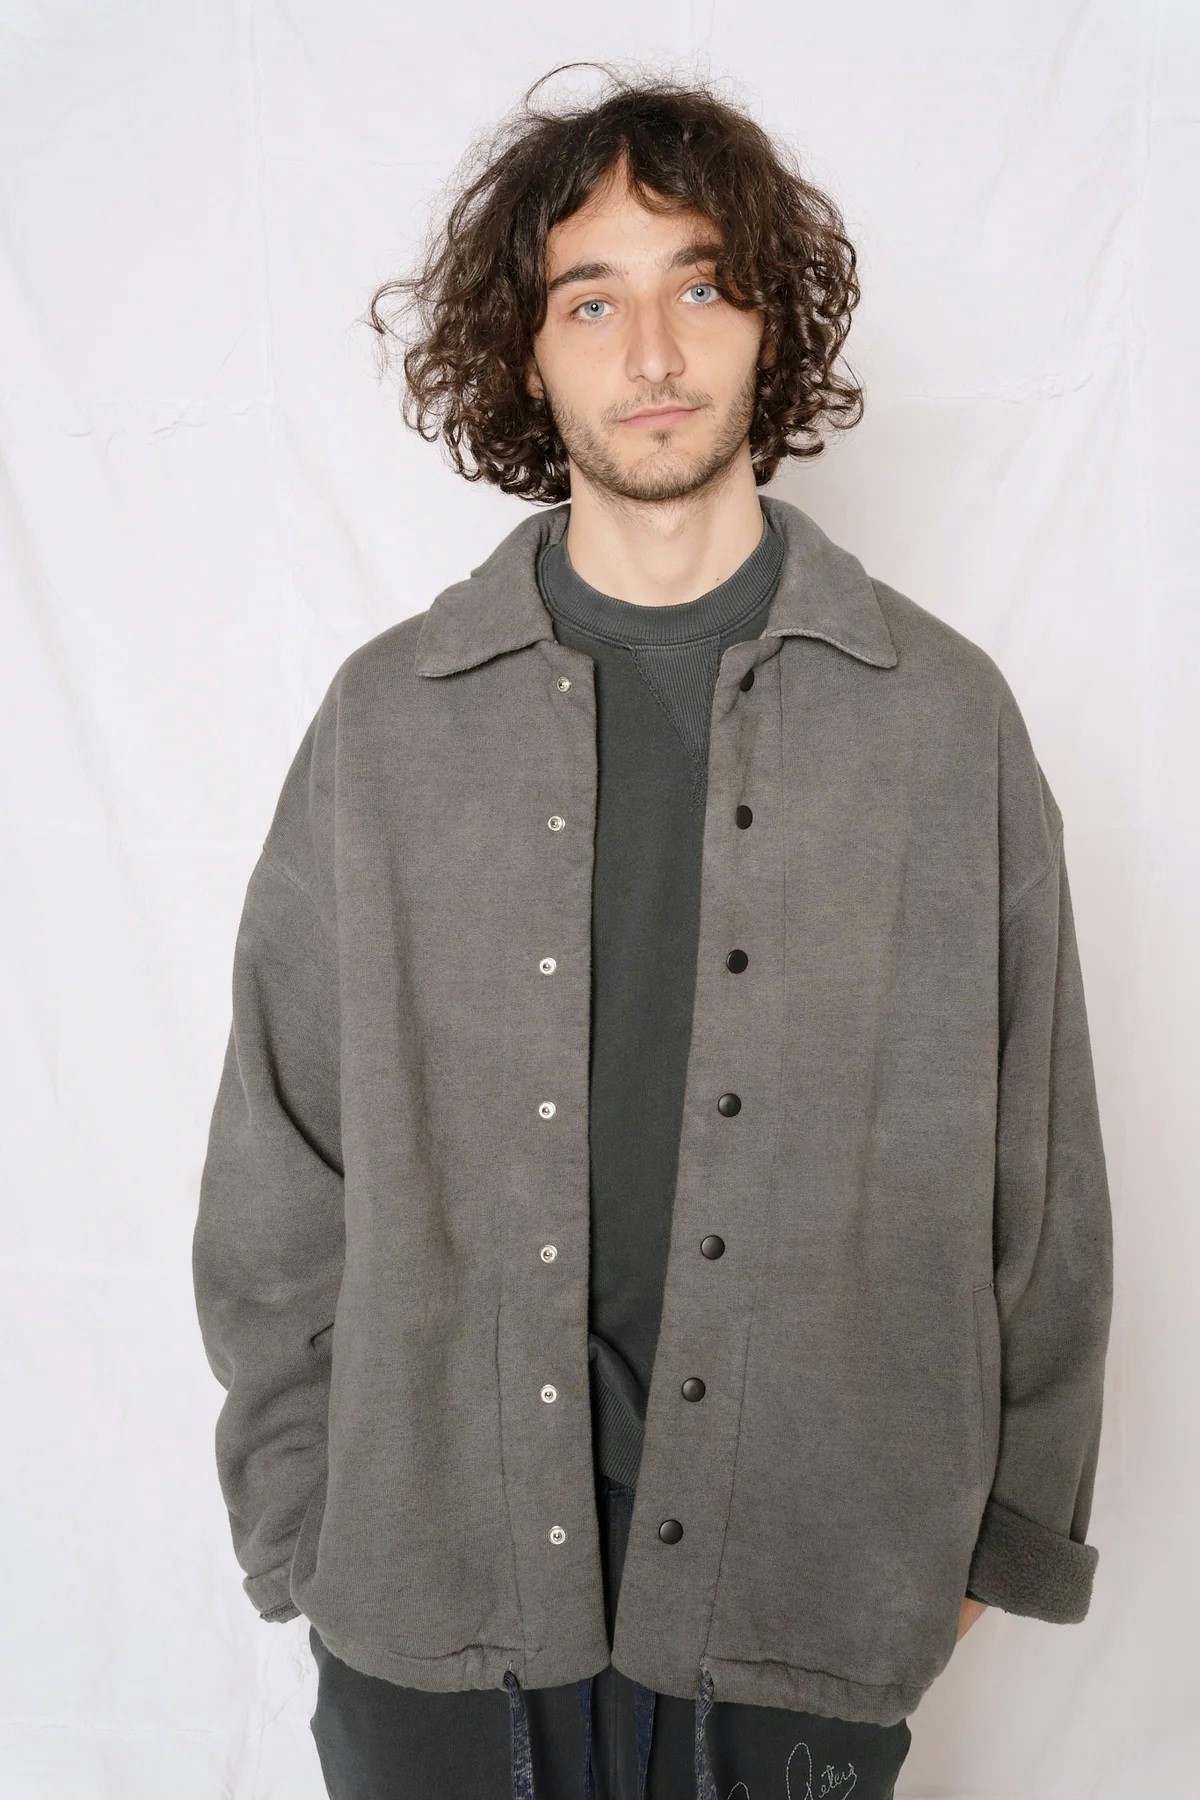 DR. COLLECTORS Japanese Fleece Jacket in Swiss Army L